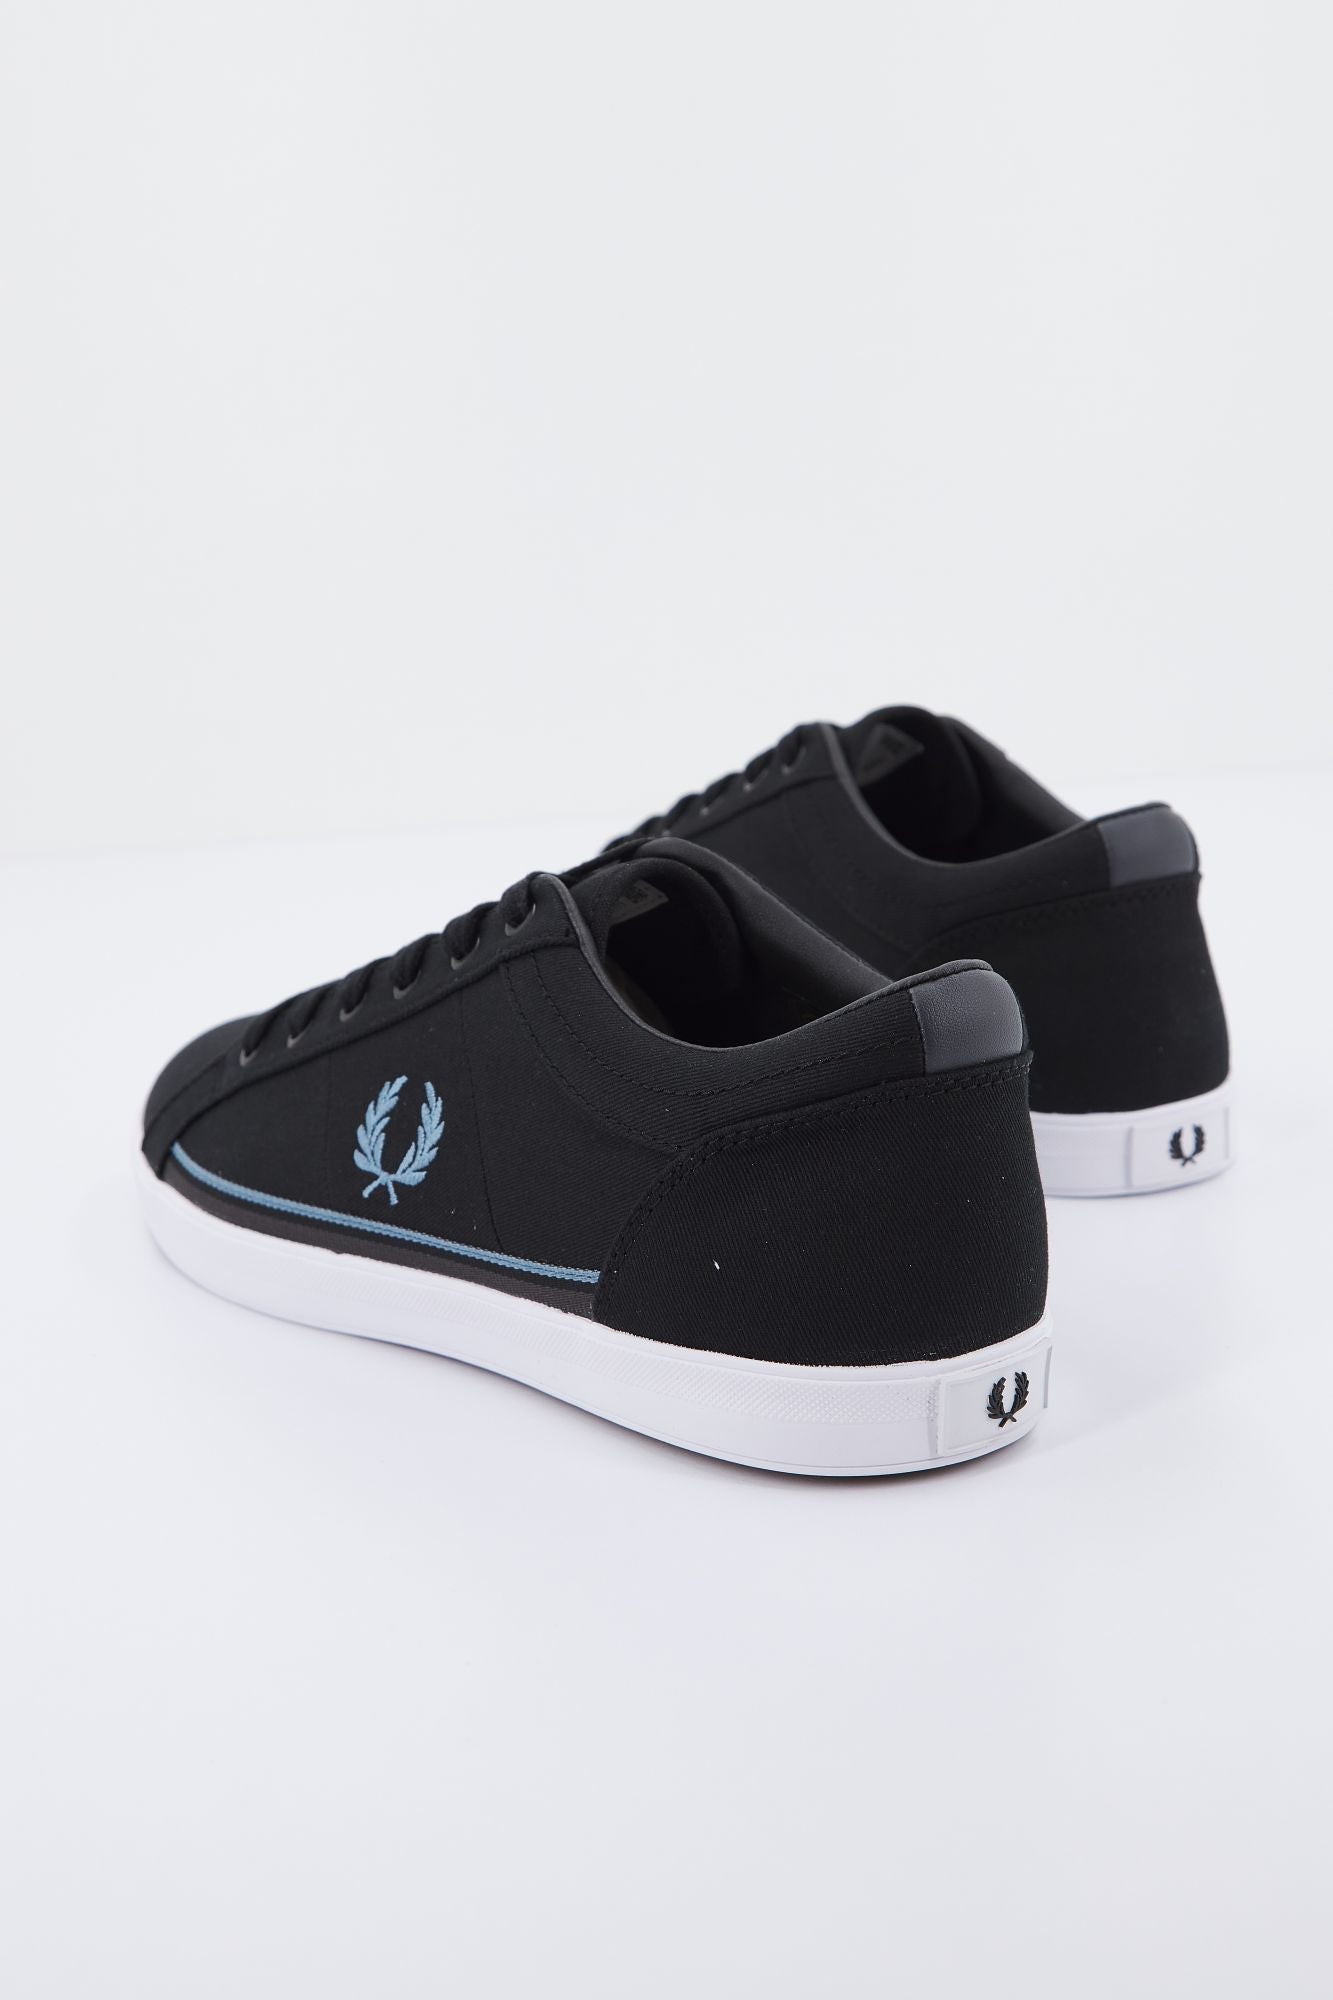 FRED PERRY BASELINE TWILL en color NEGRO (3)